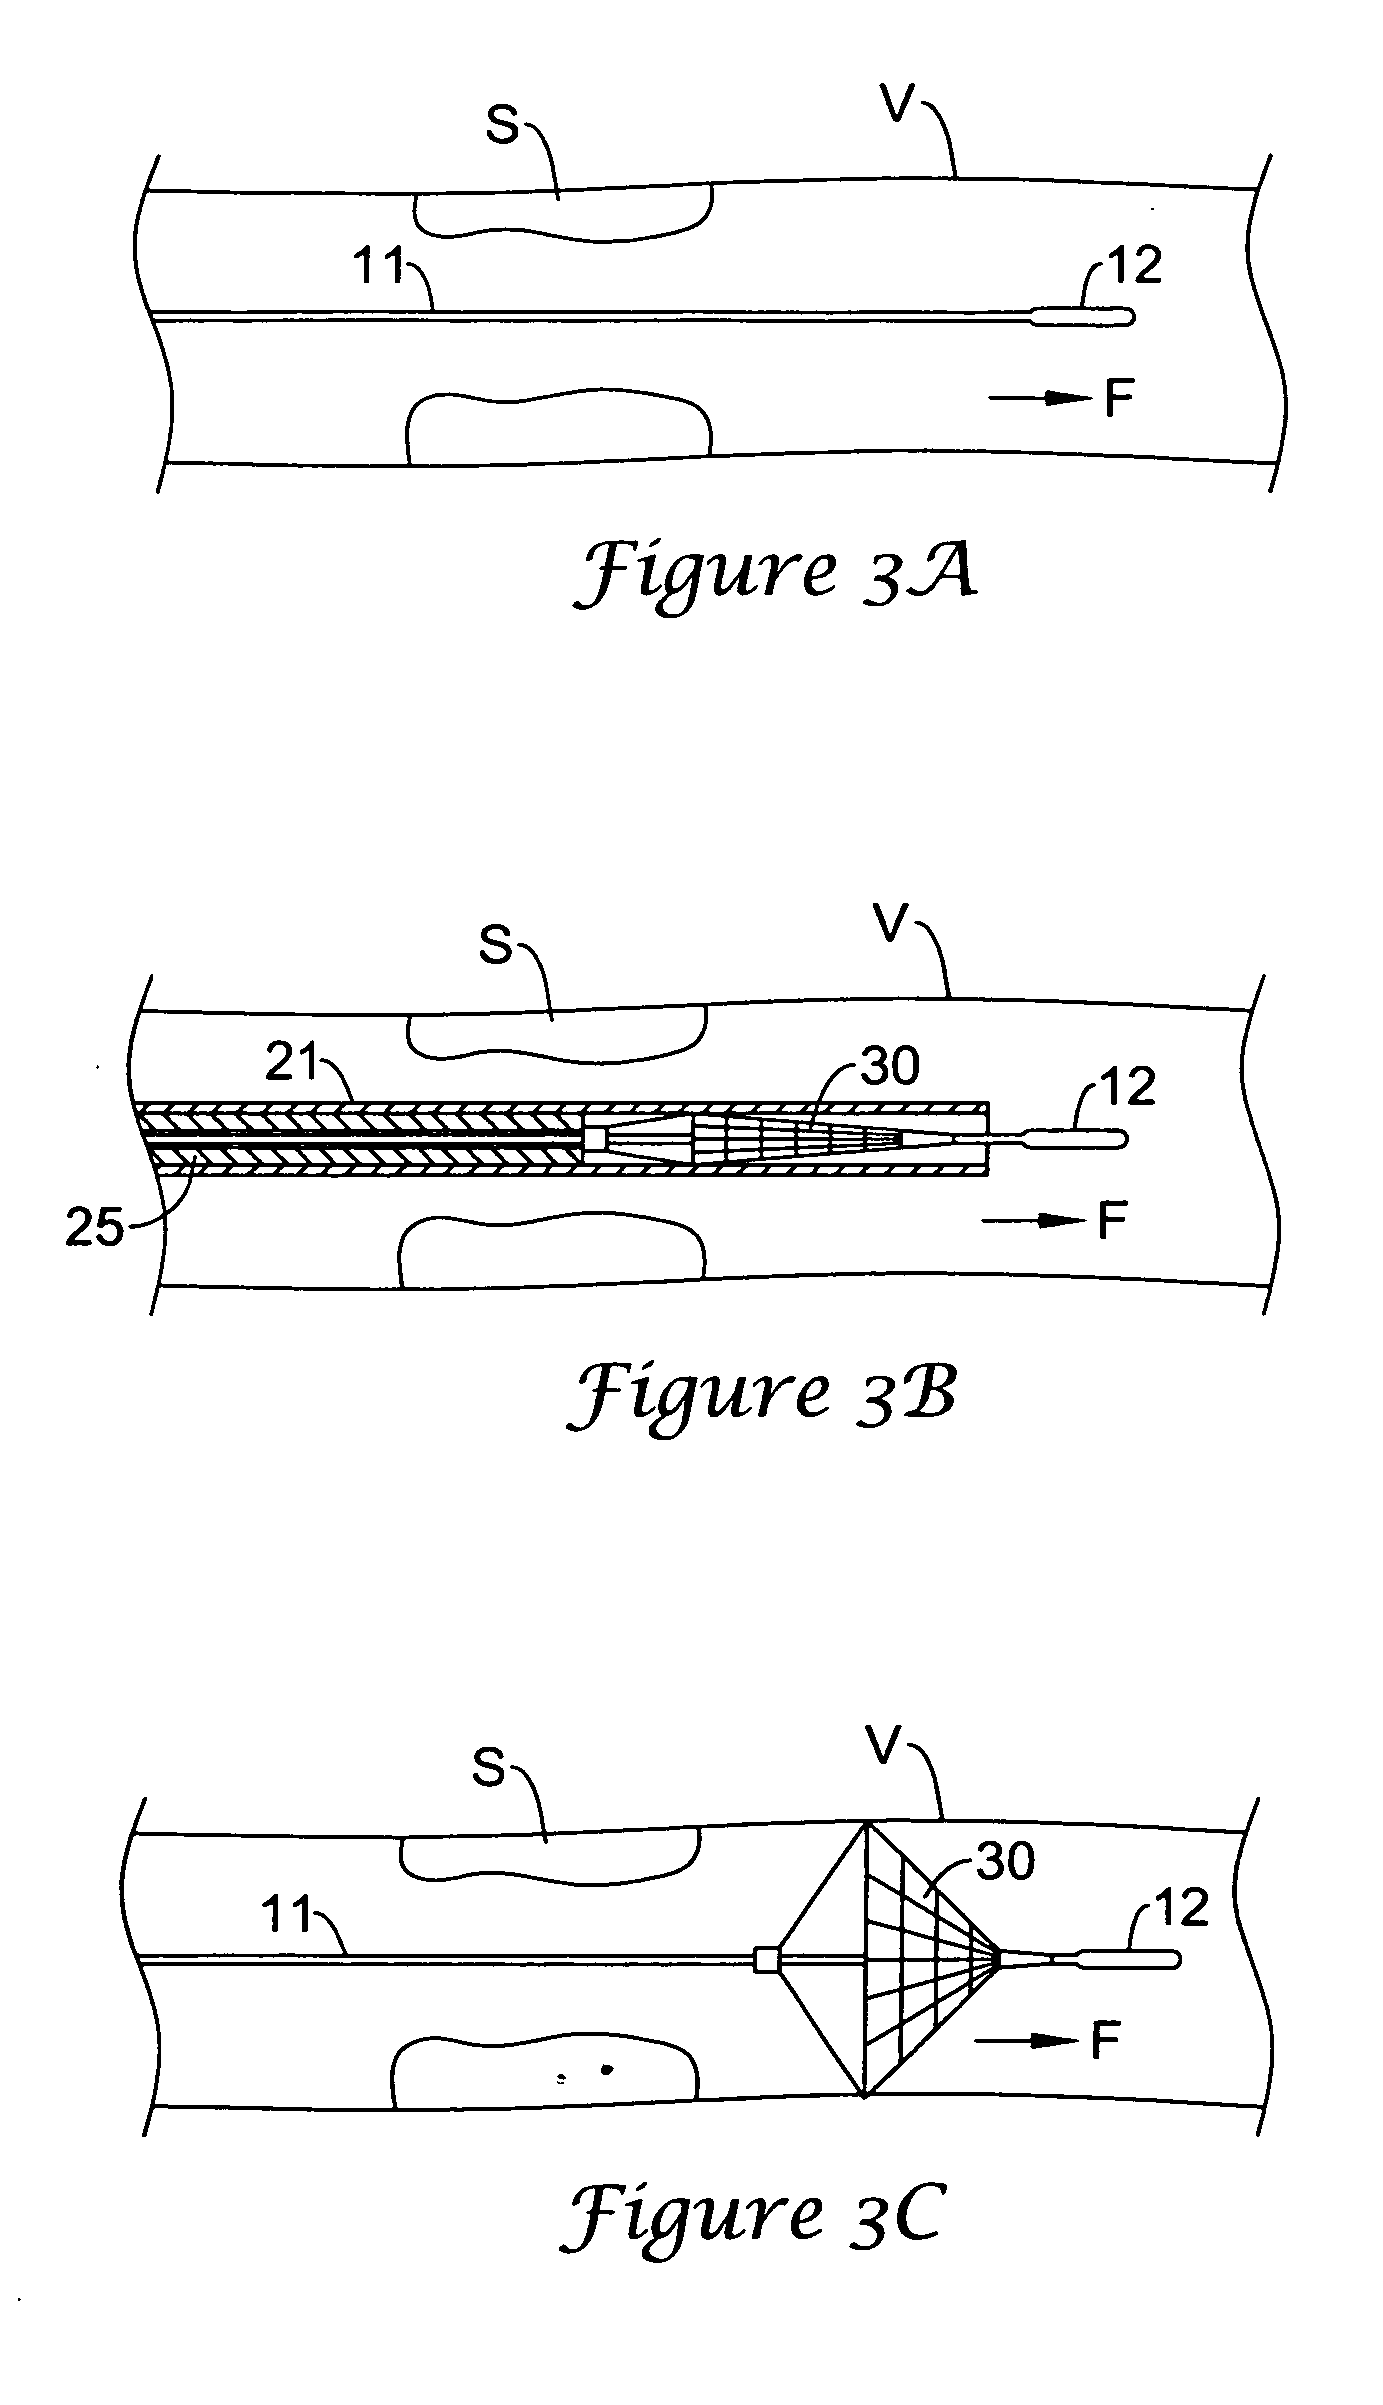 Emboli filtration system and methods of use